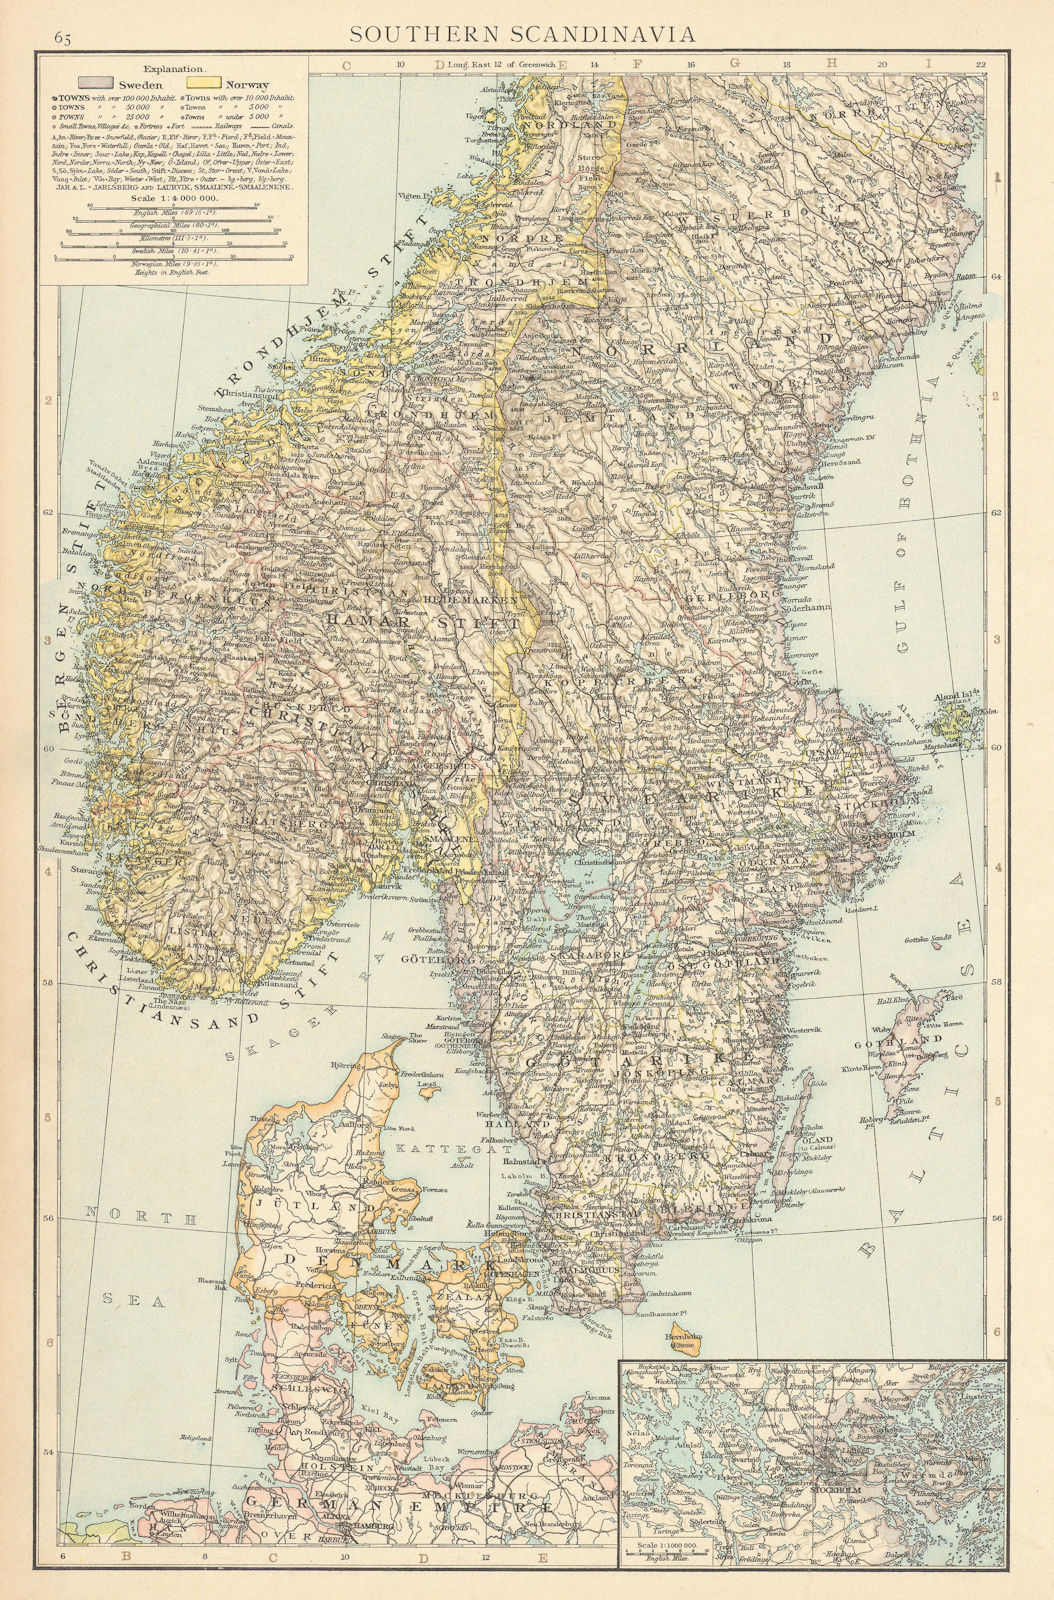 Southern Scandinavia. Norway Sweden Denmark. Stockholm environs. TIMES 1895 map